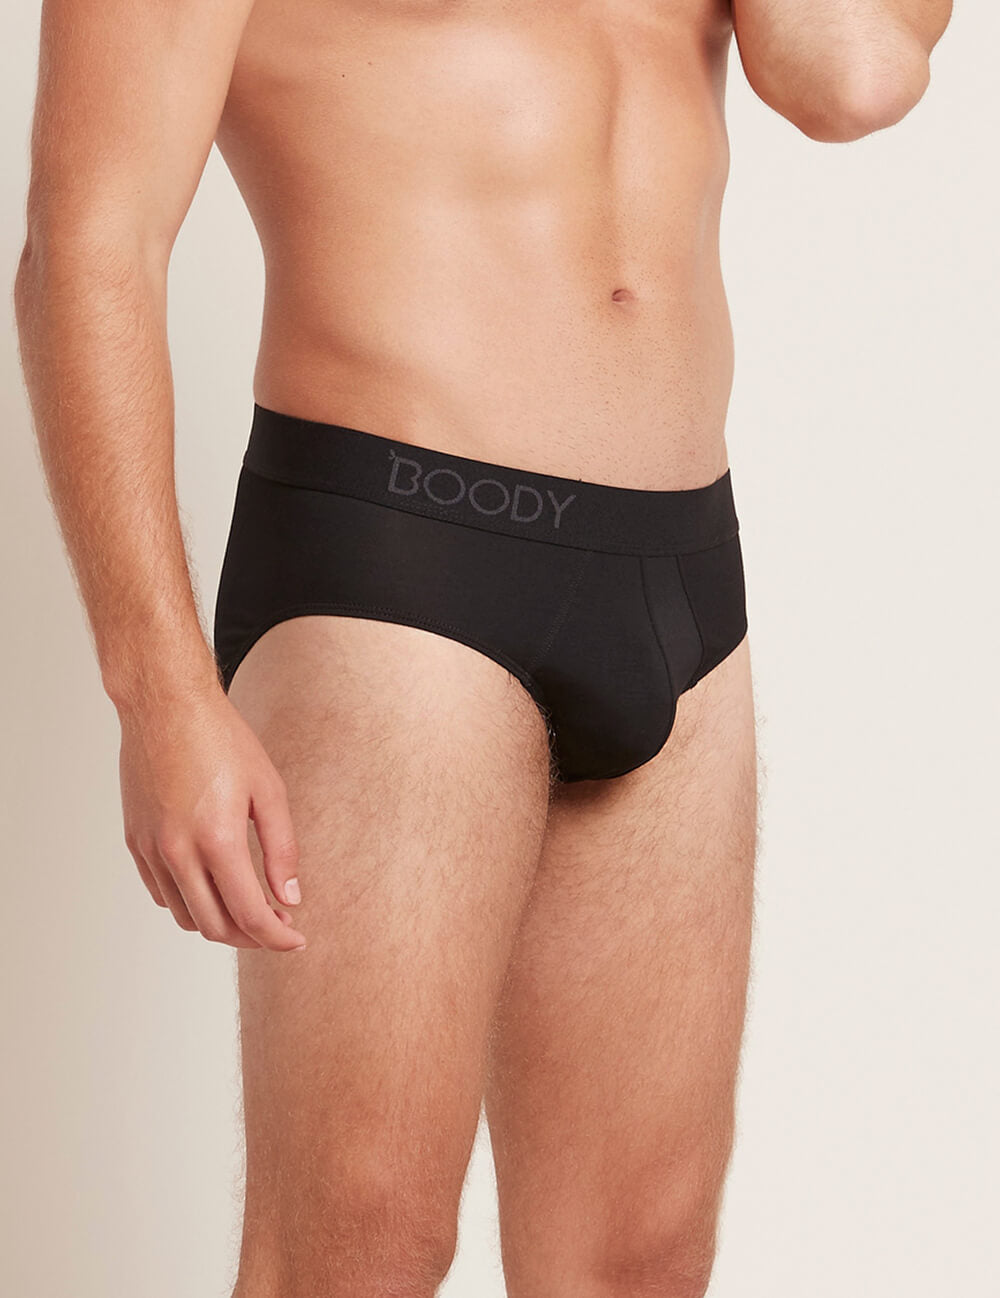 Boody Men's Everyday Brief in Black Side View